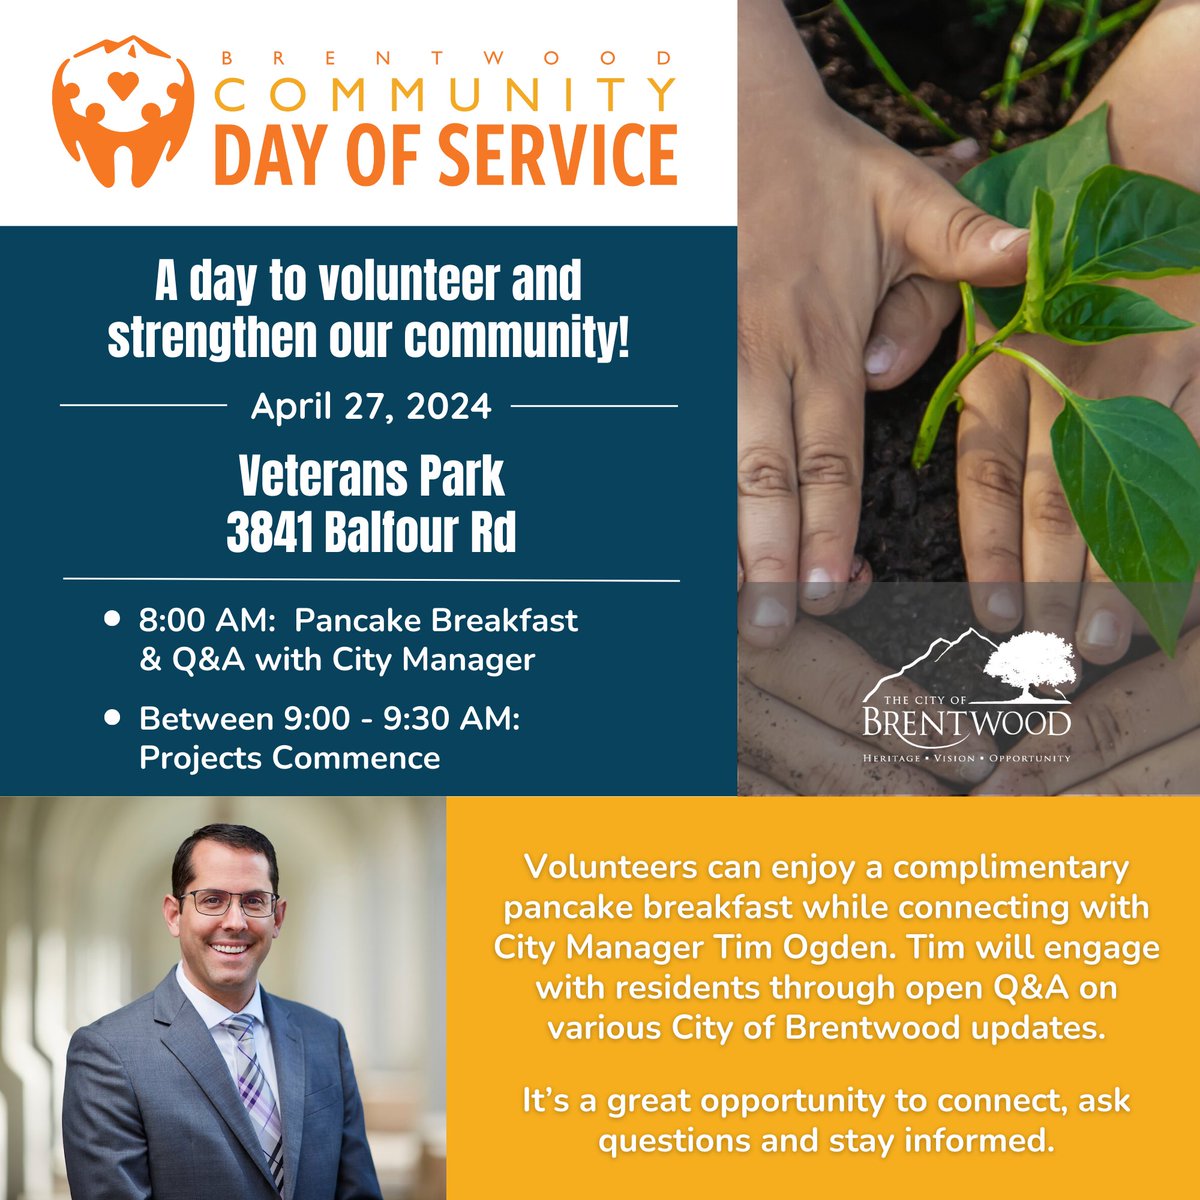 During the Brentwood Community Day of Service, volunteers can enjoy a complimentary pancake breakfast while connecting with City Manager Tim Ogden. Tim will engage with residents through open Q&A on various City of Brentwood updates.